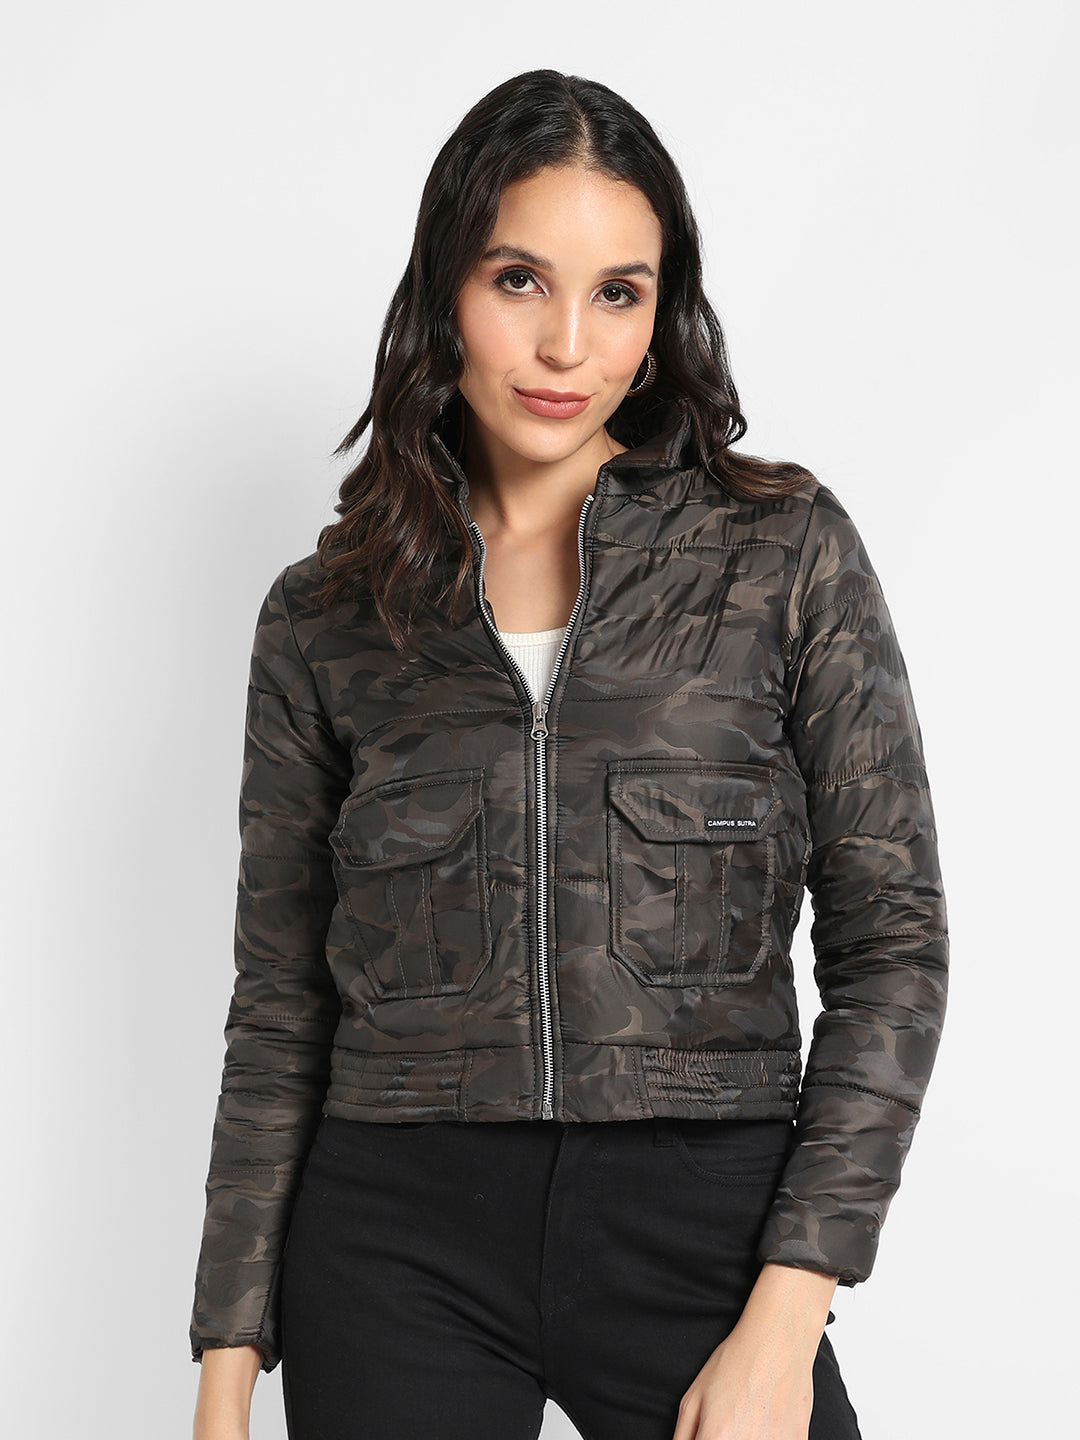 Camouflage Bomber Jacket With Flap Pockets